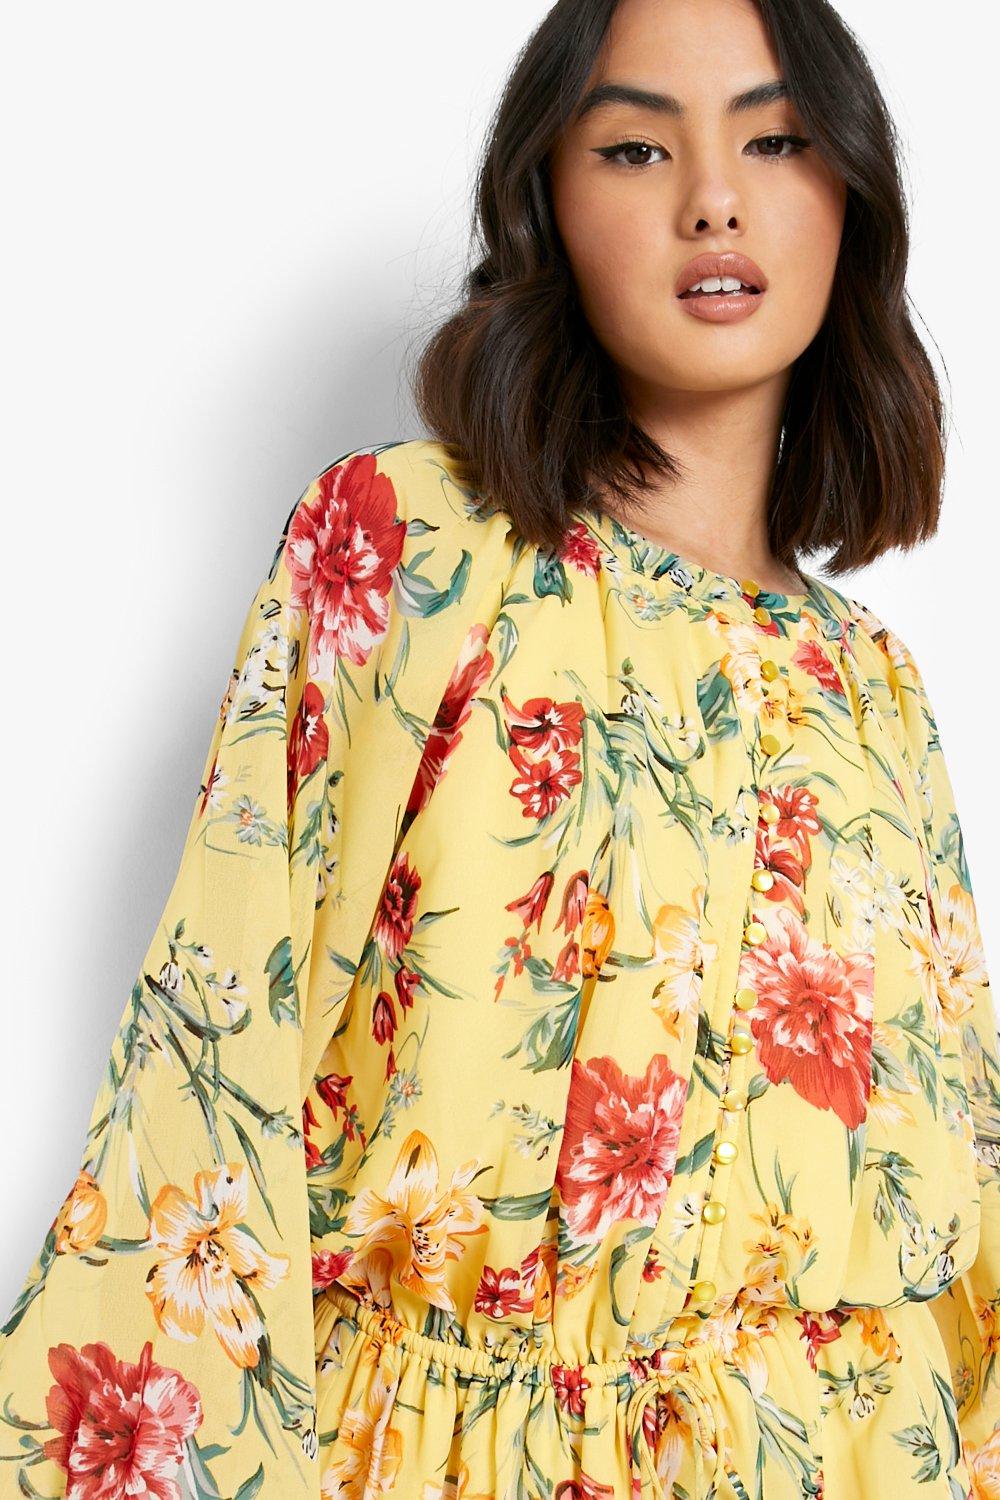 Boohoo Floral Chiffon Button Down Romper in Yellow Womens Clothing Jumpsuits and rompers Playsuits 